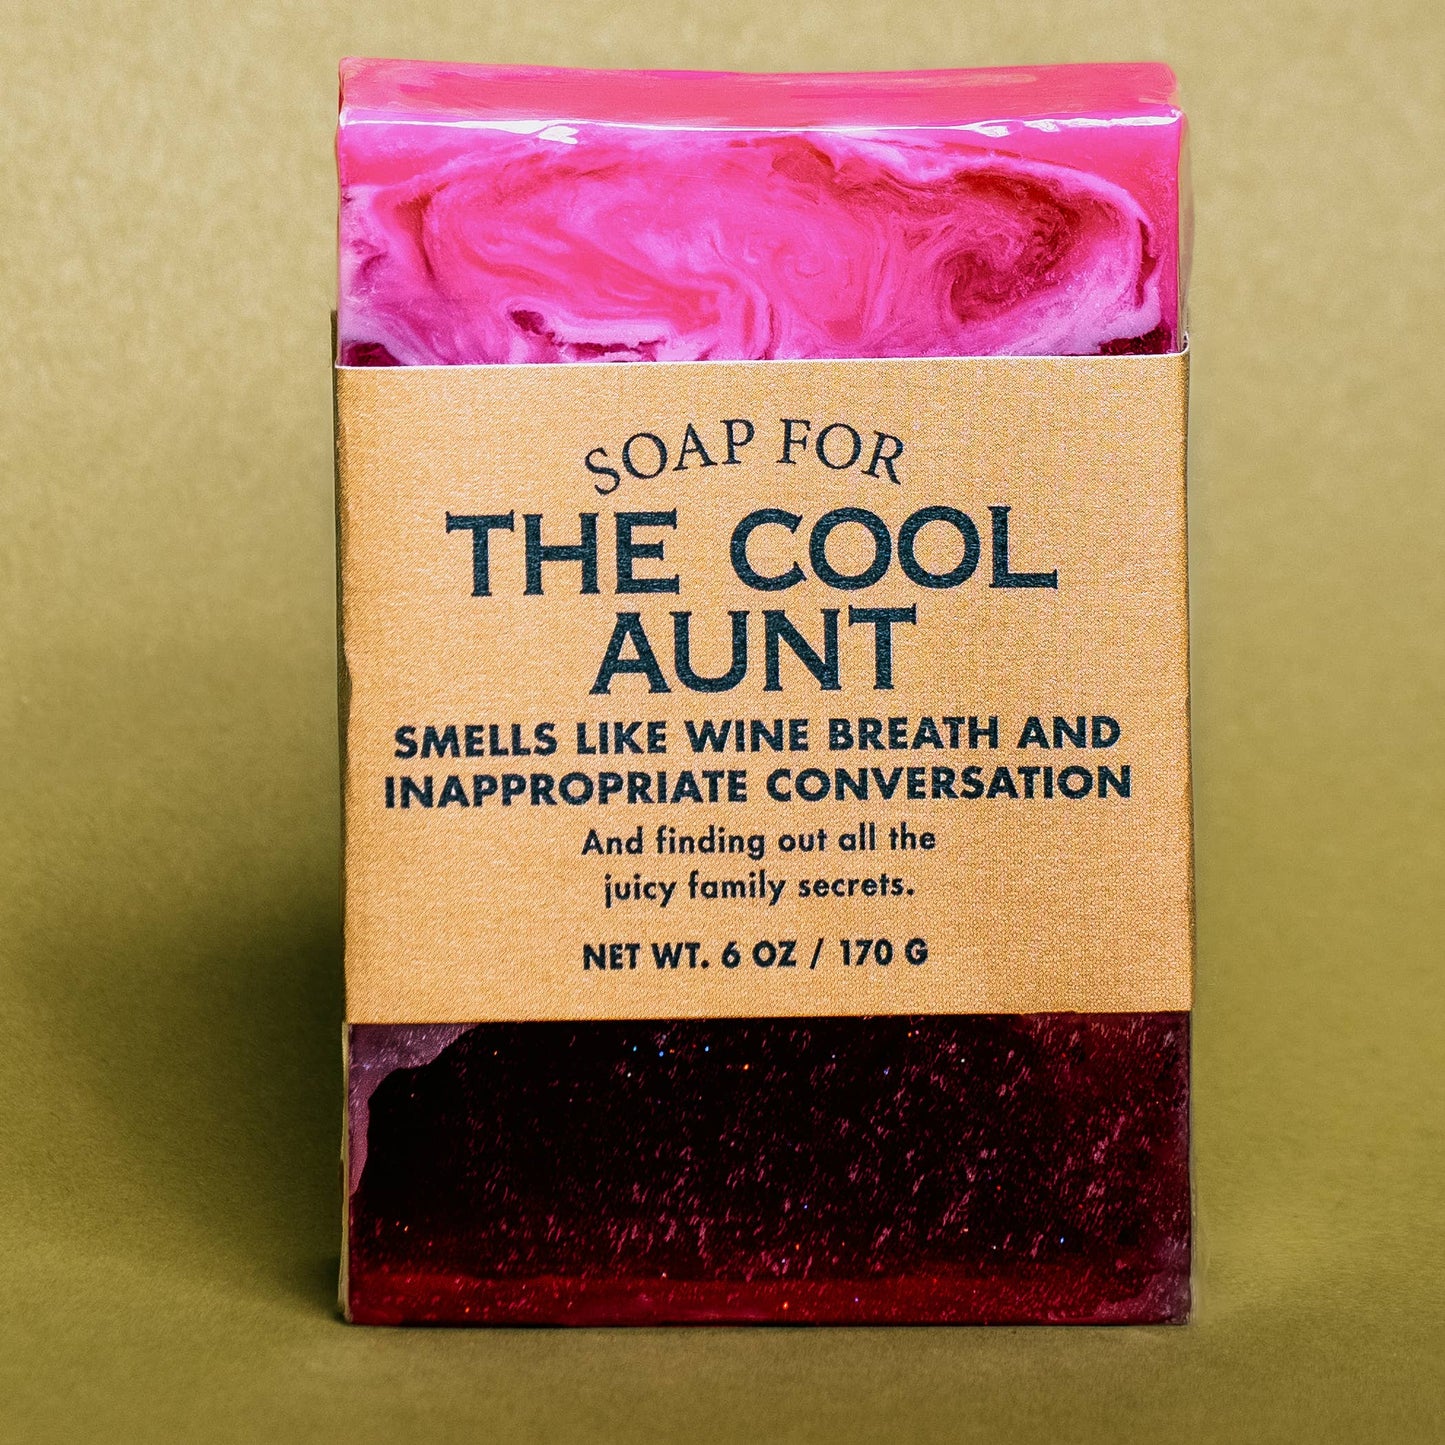 A Soap for the Cool Aunt | Funny Soap